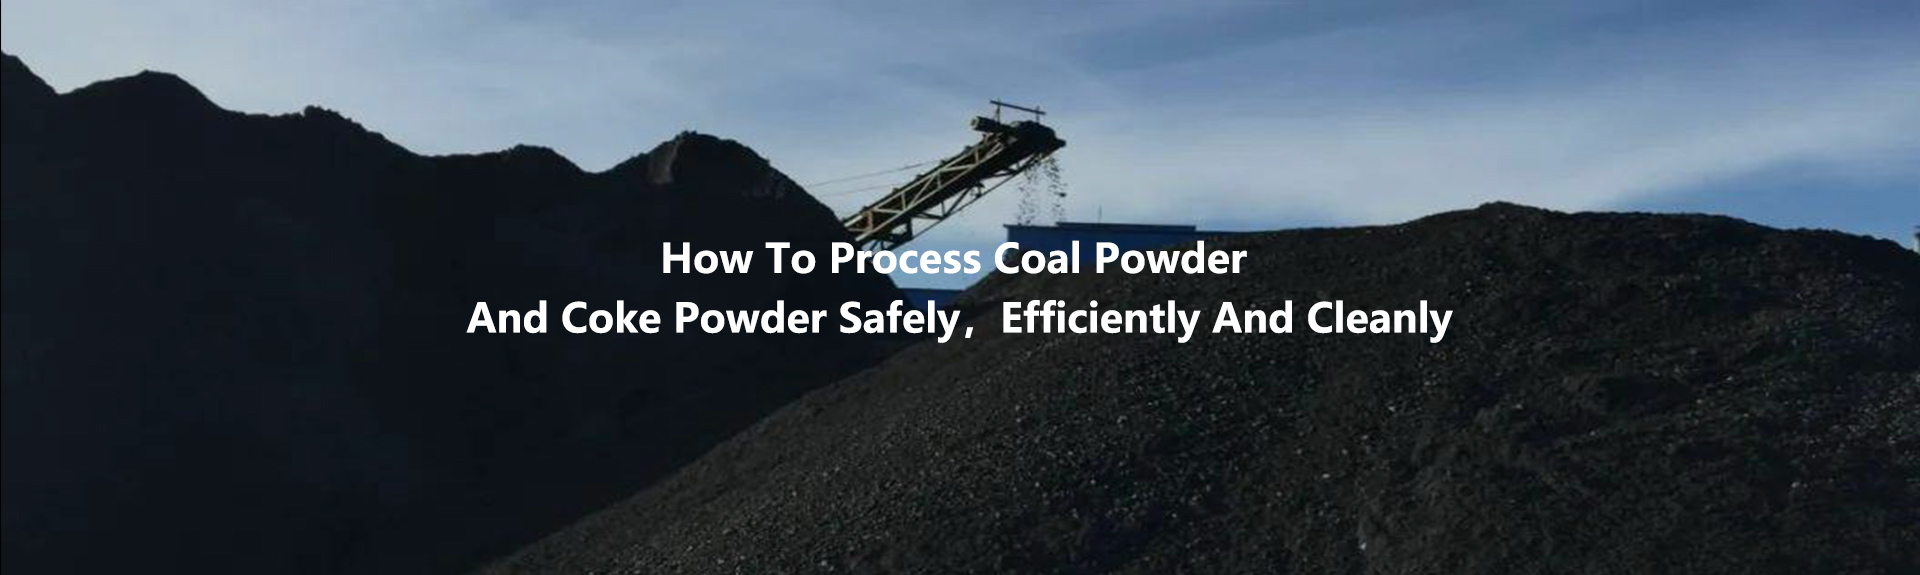 Pulverized Coal Processing Industry